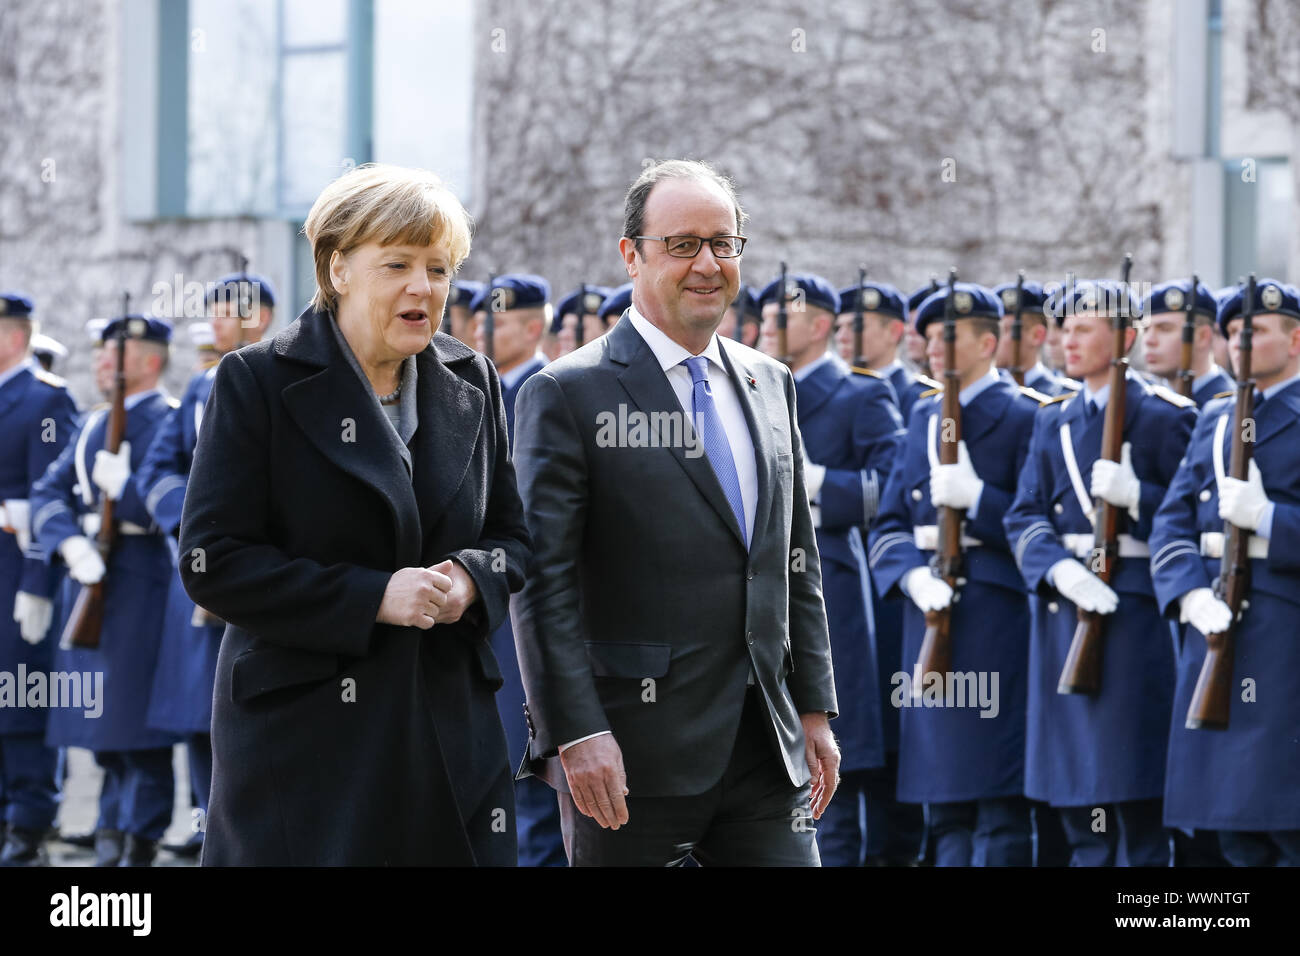 17. German-French council of ministers in Berlin - Merkel Welcomes Holland Stock Photo